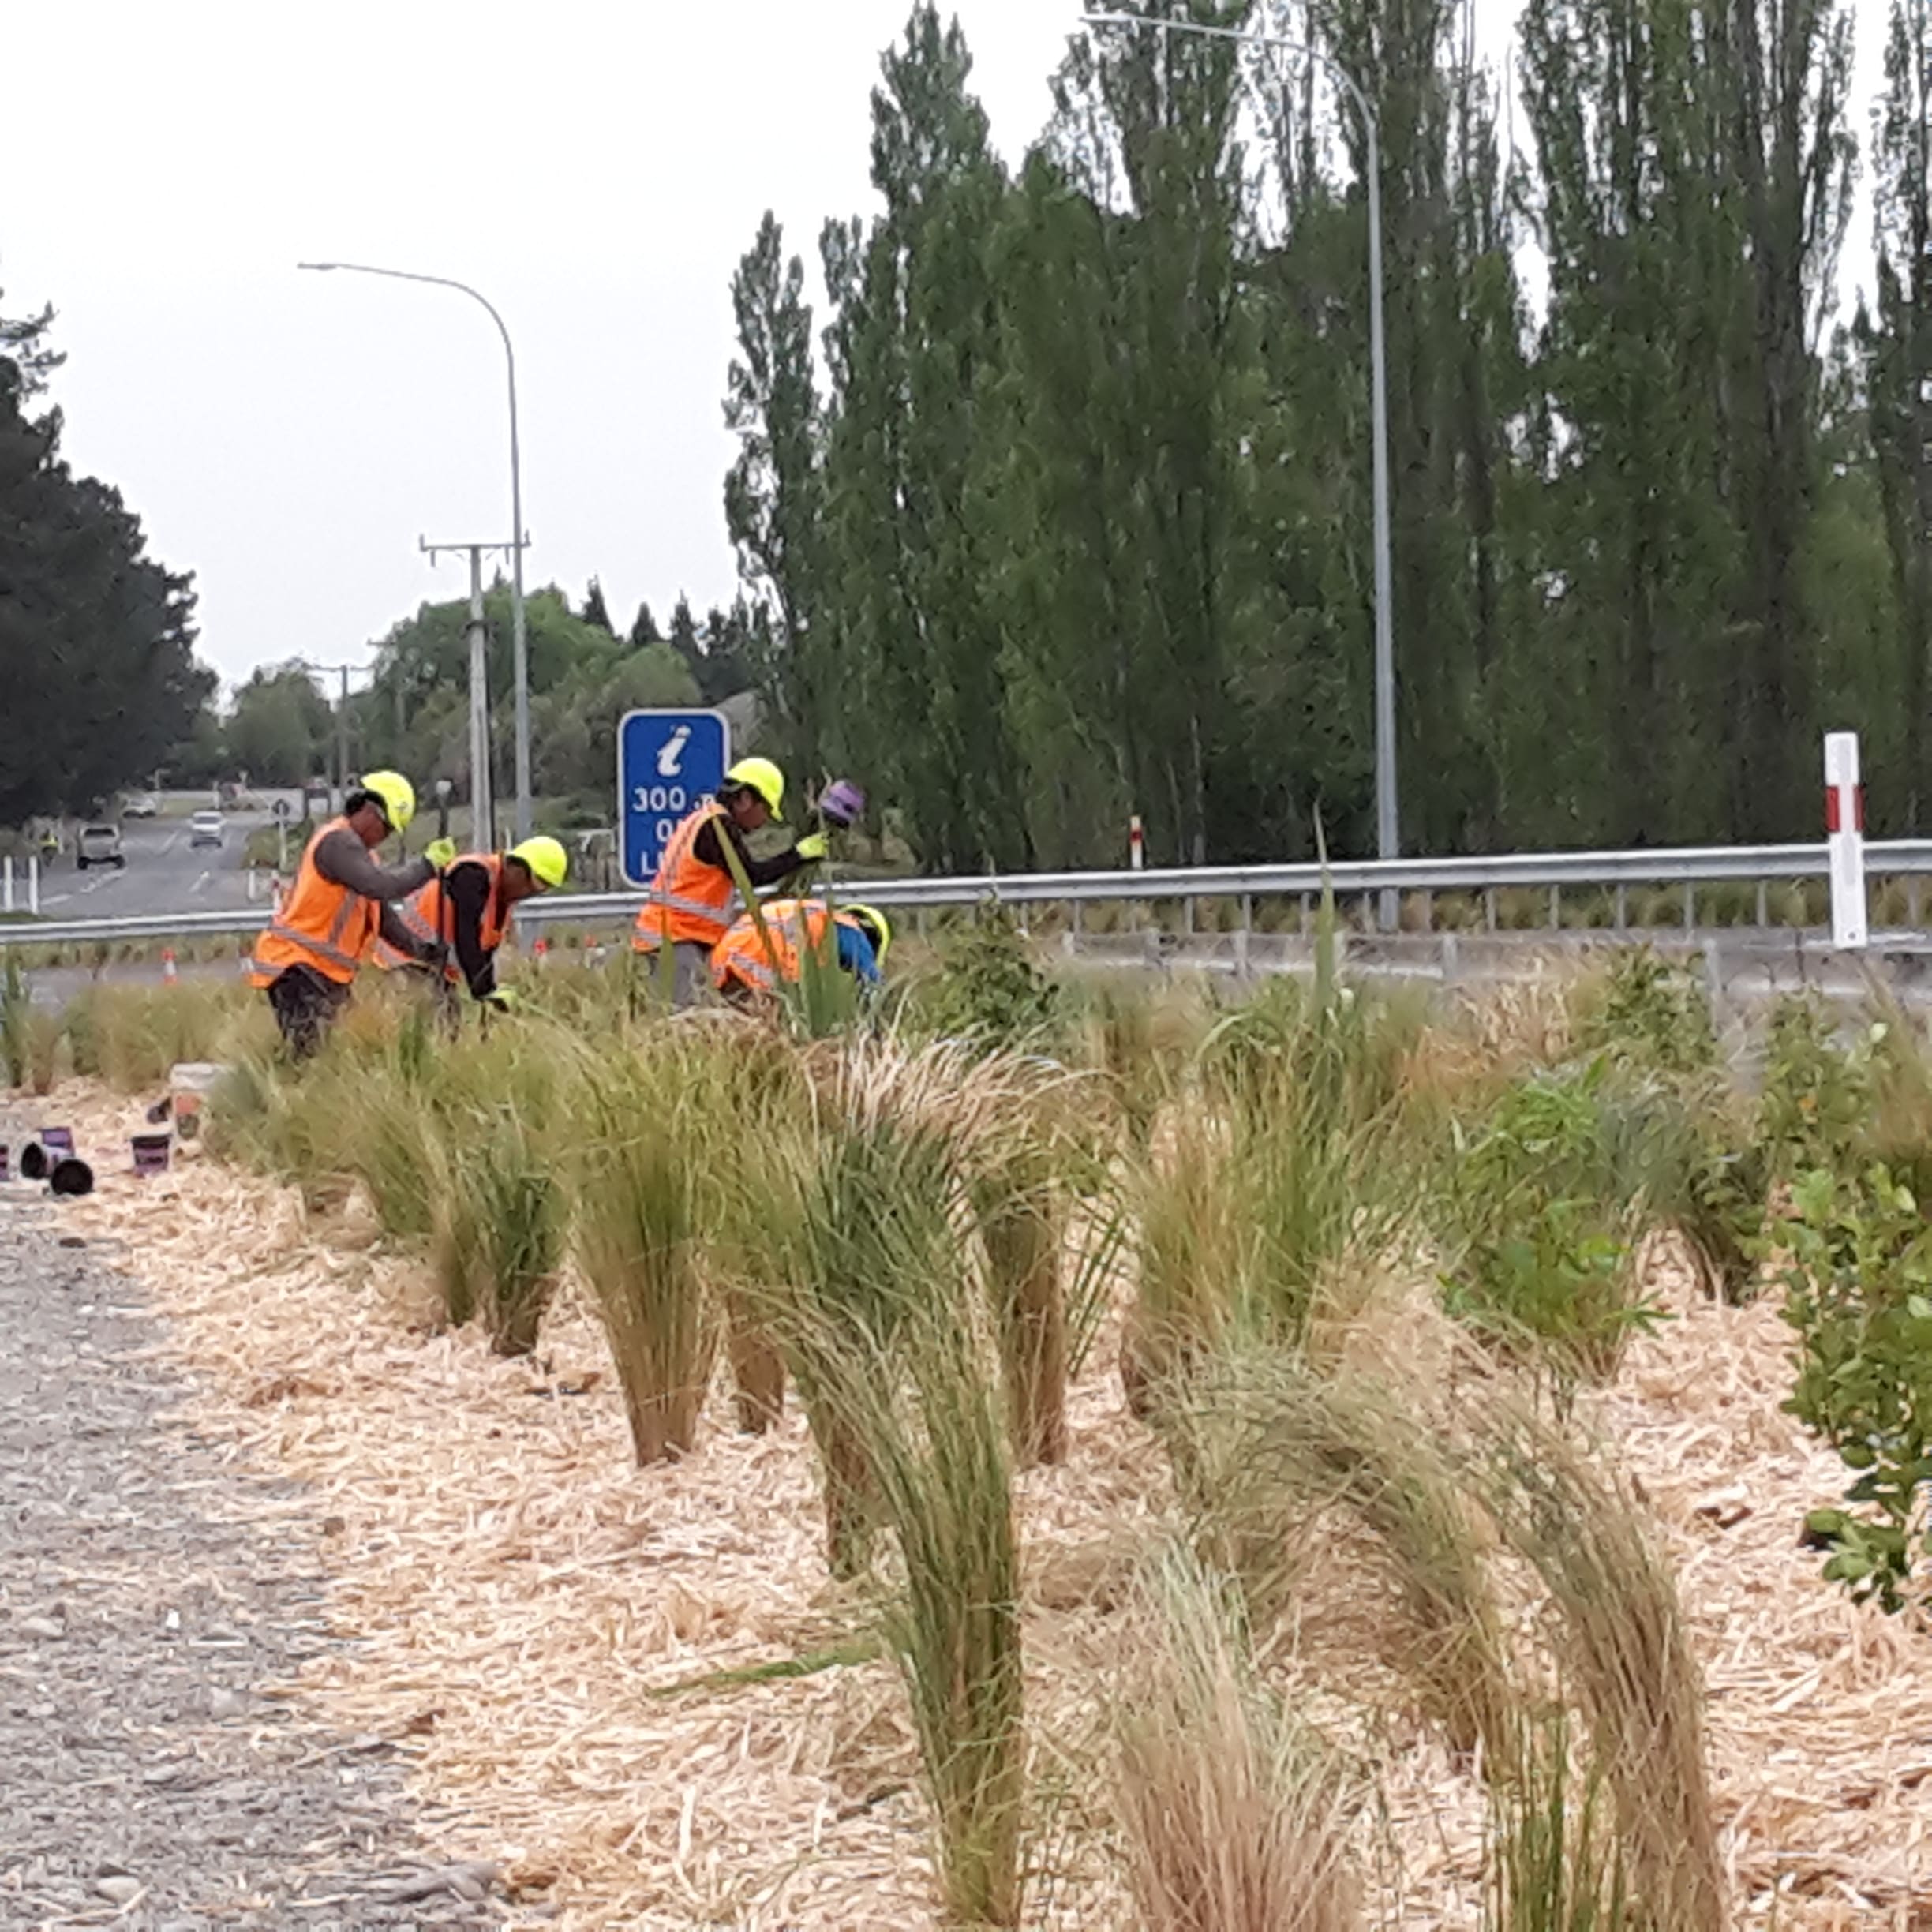 Native Solutions team implements silvicultural practices and highway beautification projects in Canterbury, Christchurch, Auckland, and Nationwide